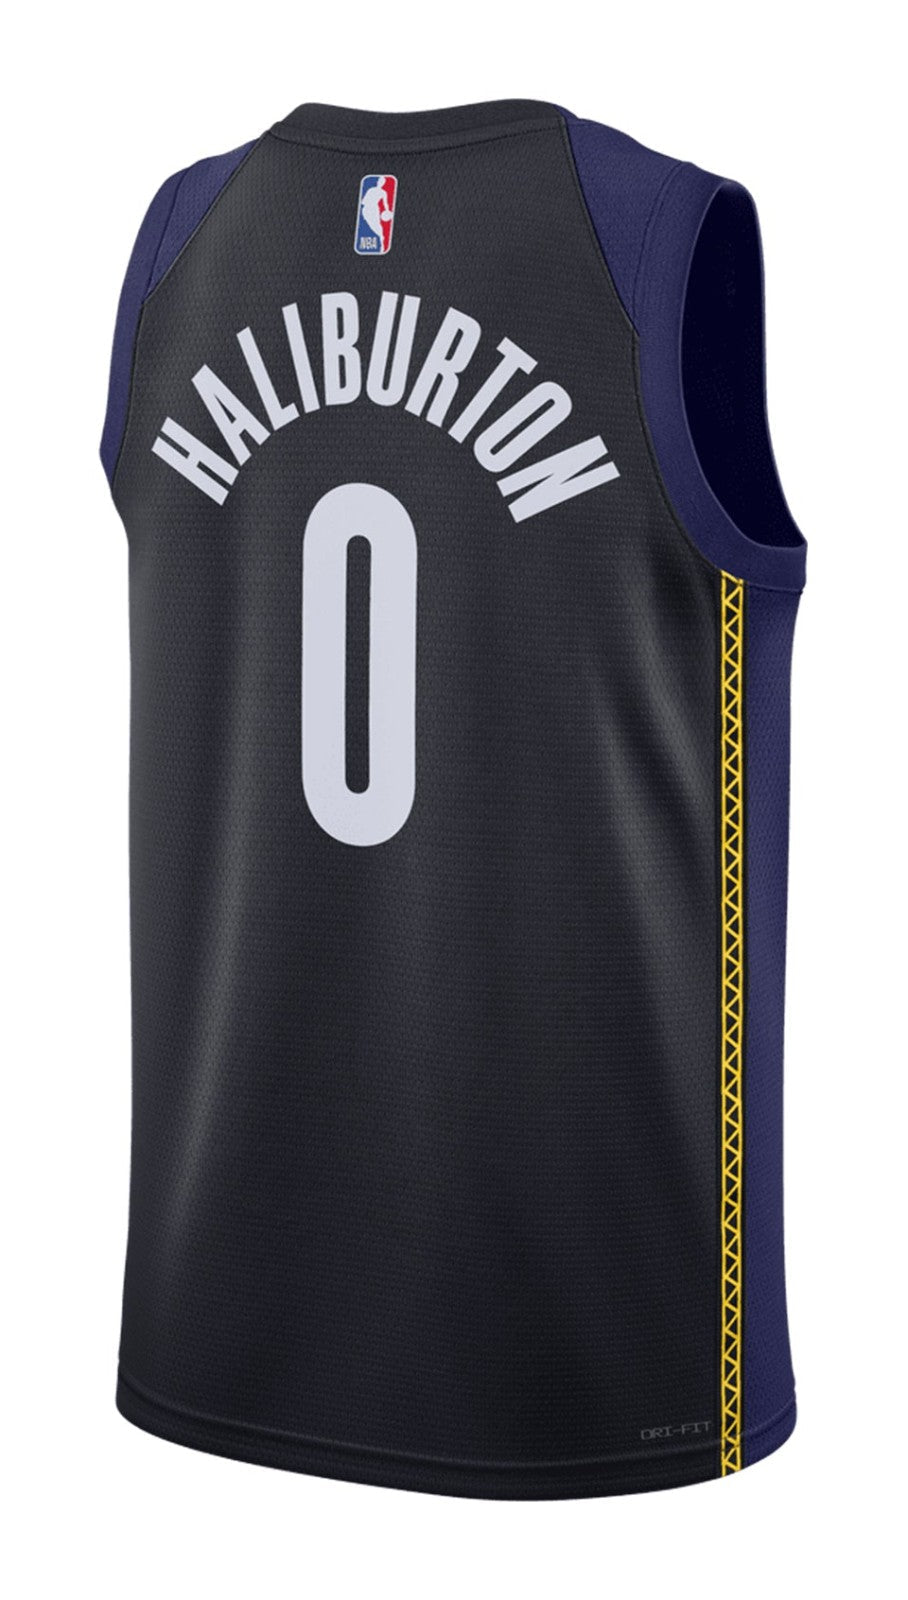 Maglia NBA Indiana Pacers City Edition 2022/23